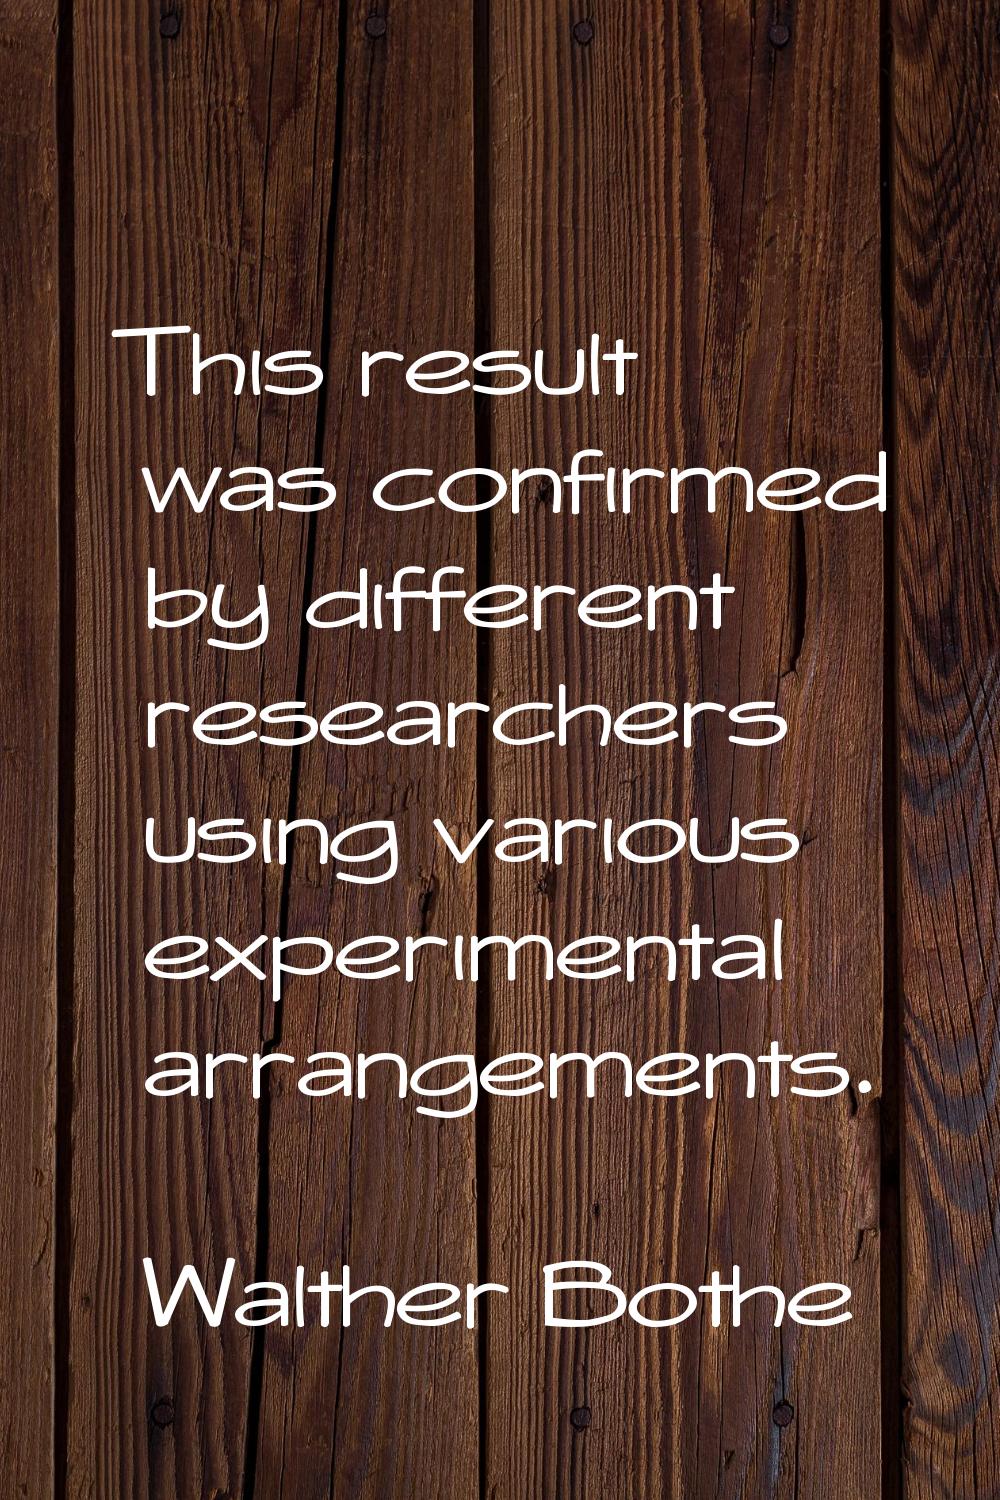 This result was confirmed by different researchers using various experimental arrangements.